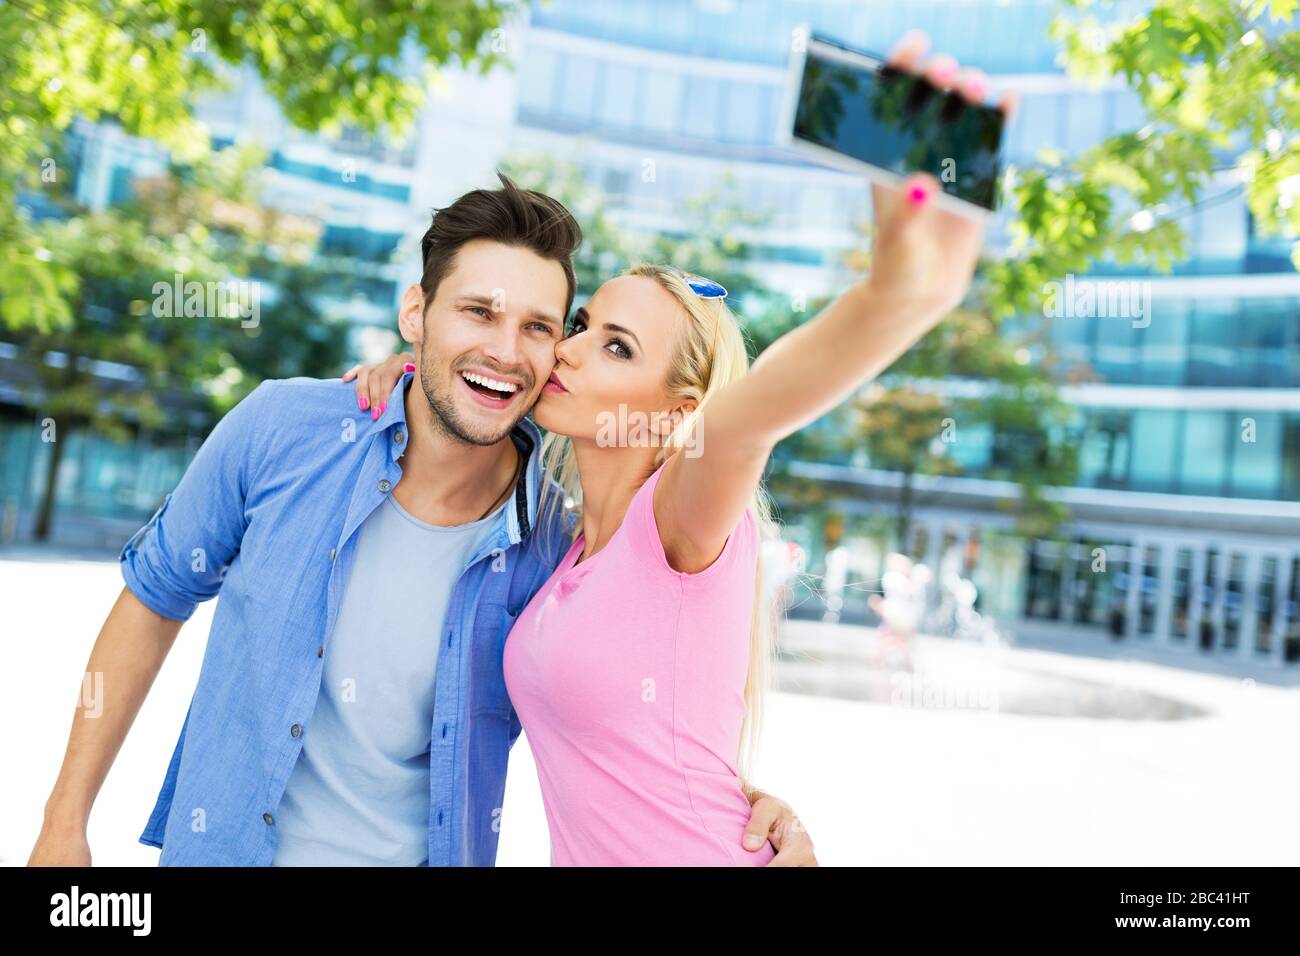 Couple taking a selfie with smartphone Stock Photo